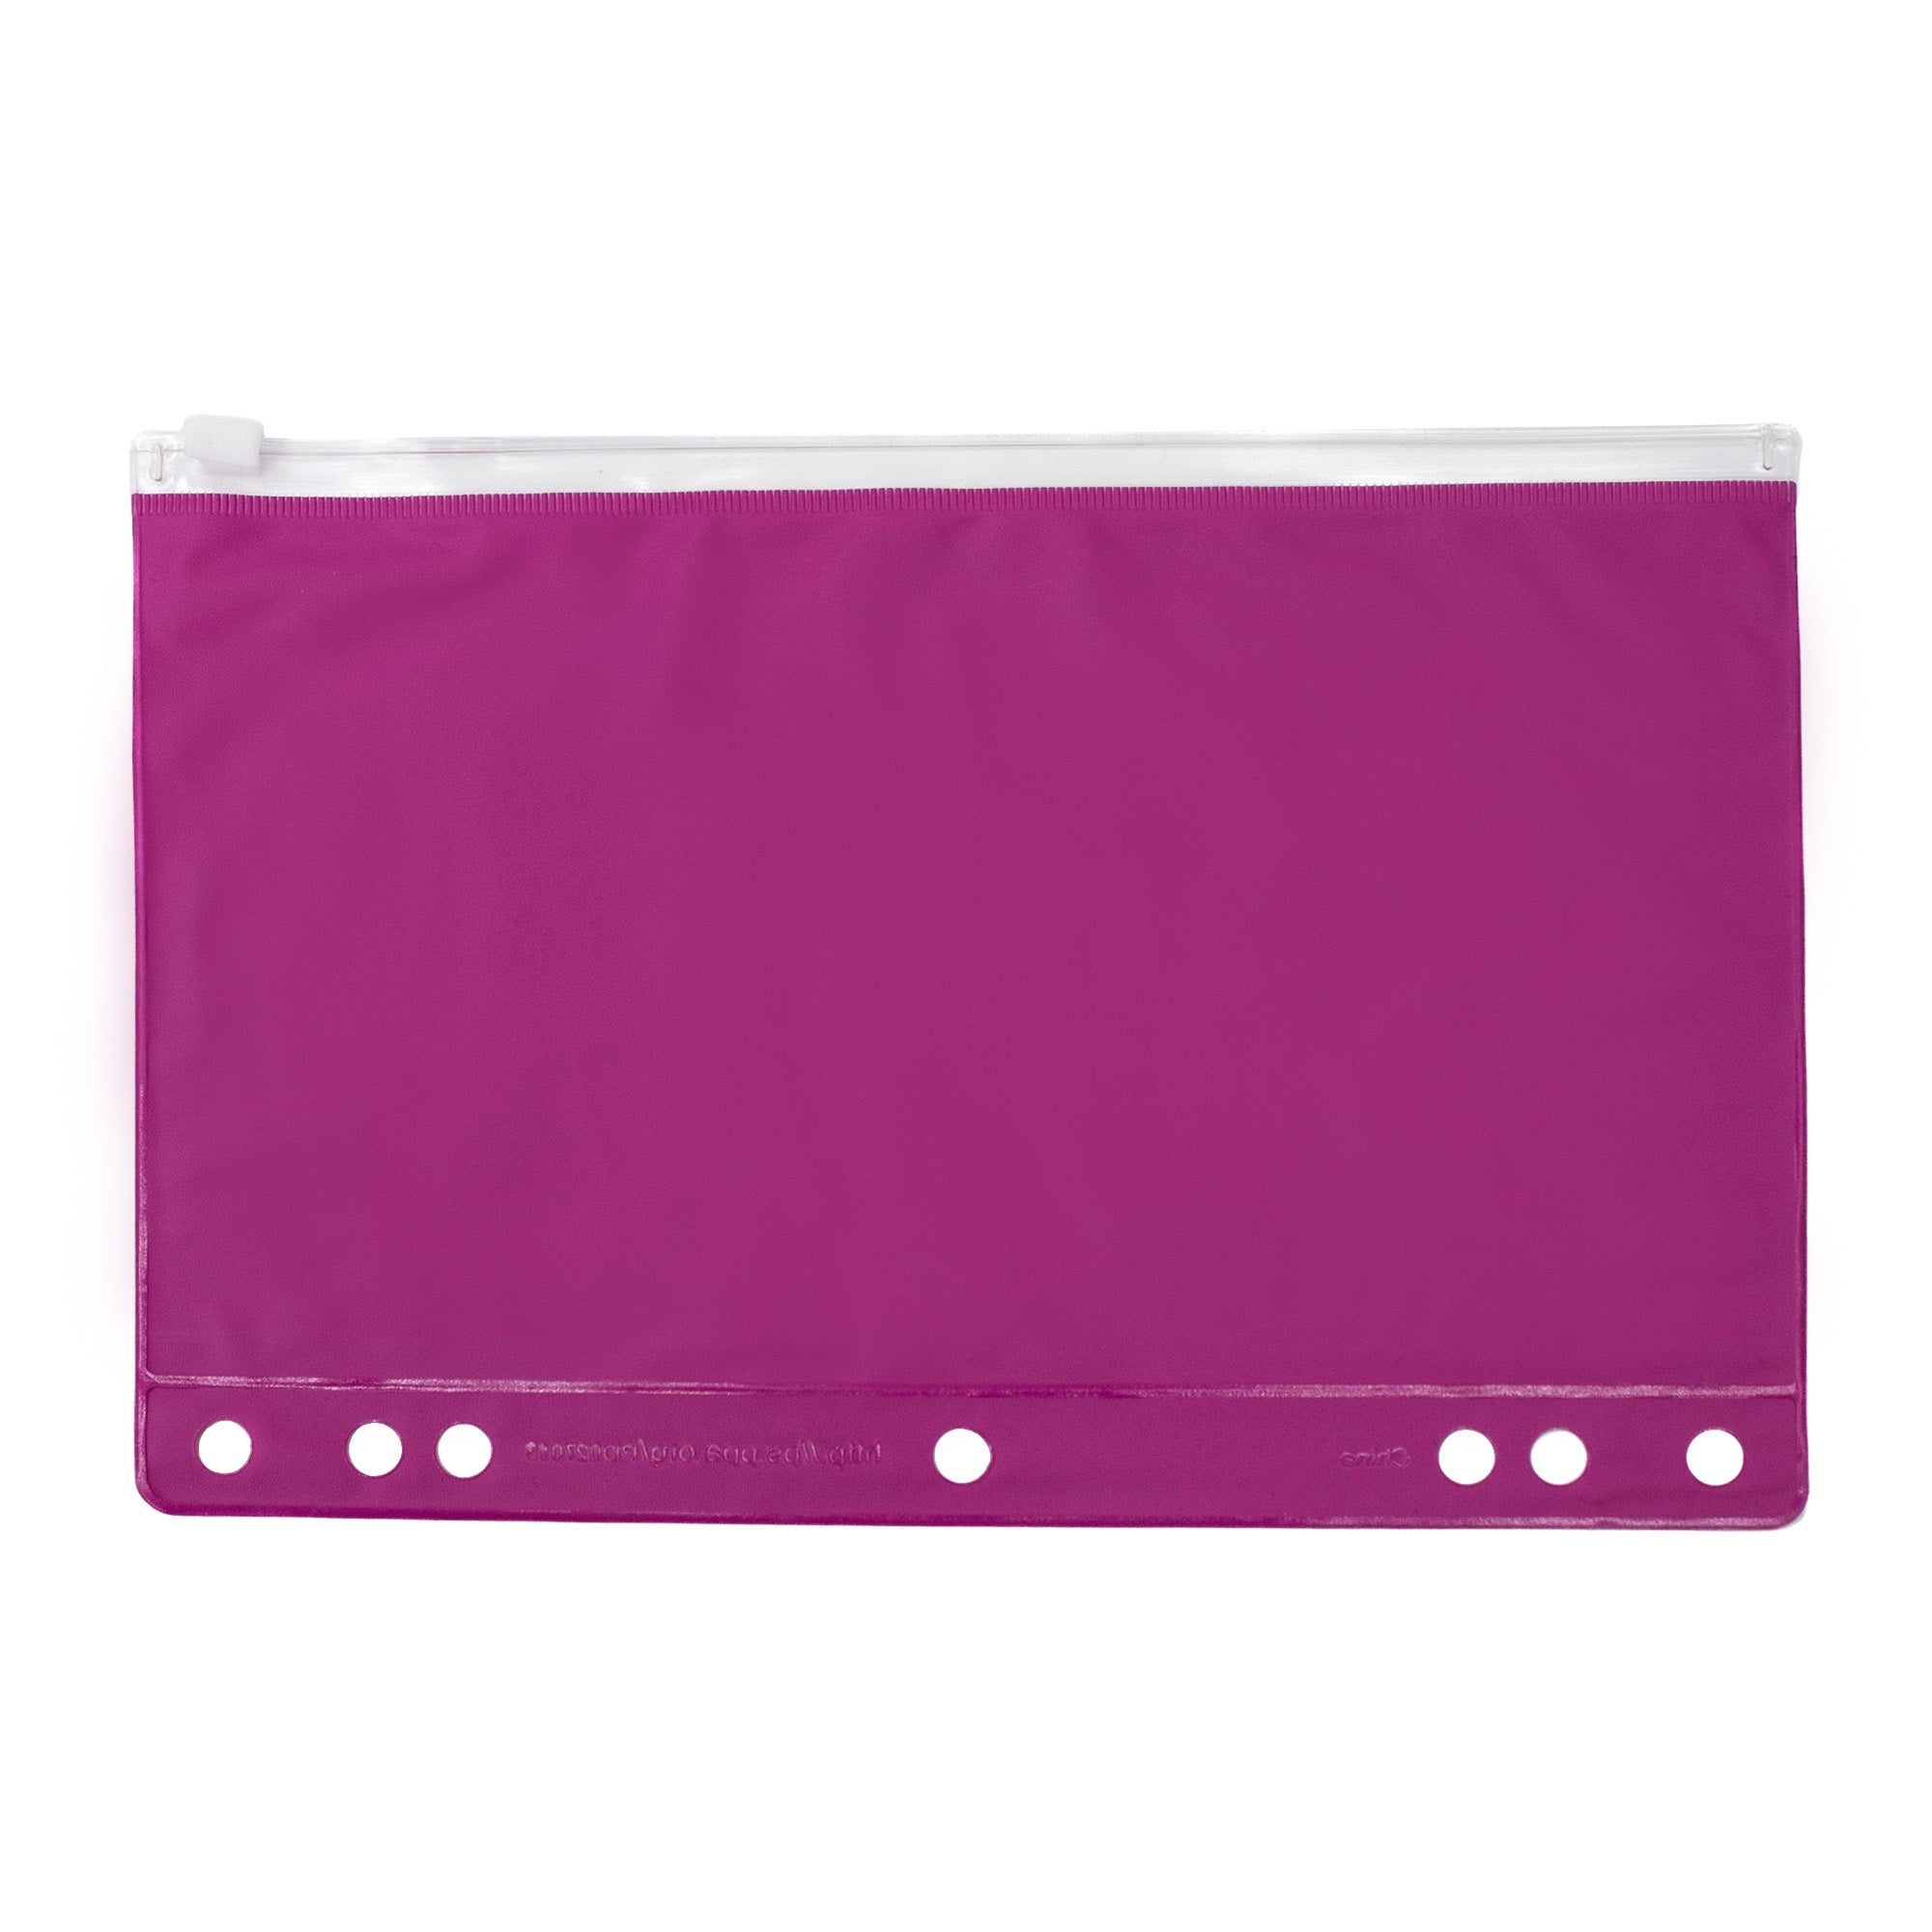 48 Clear and Pink Pencil Pouch - Bulk Case of 48 Pencil Pouches